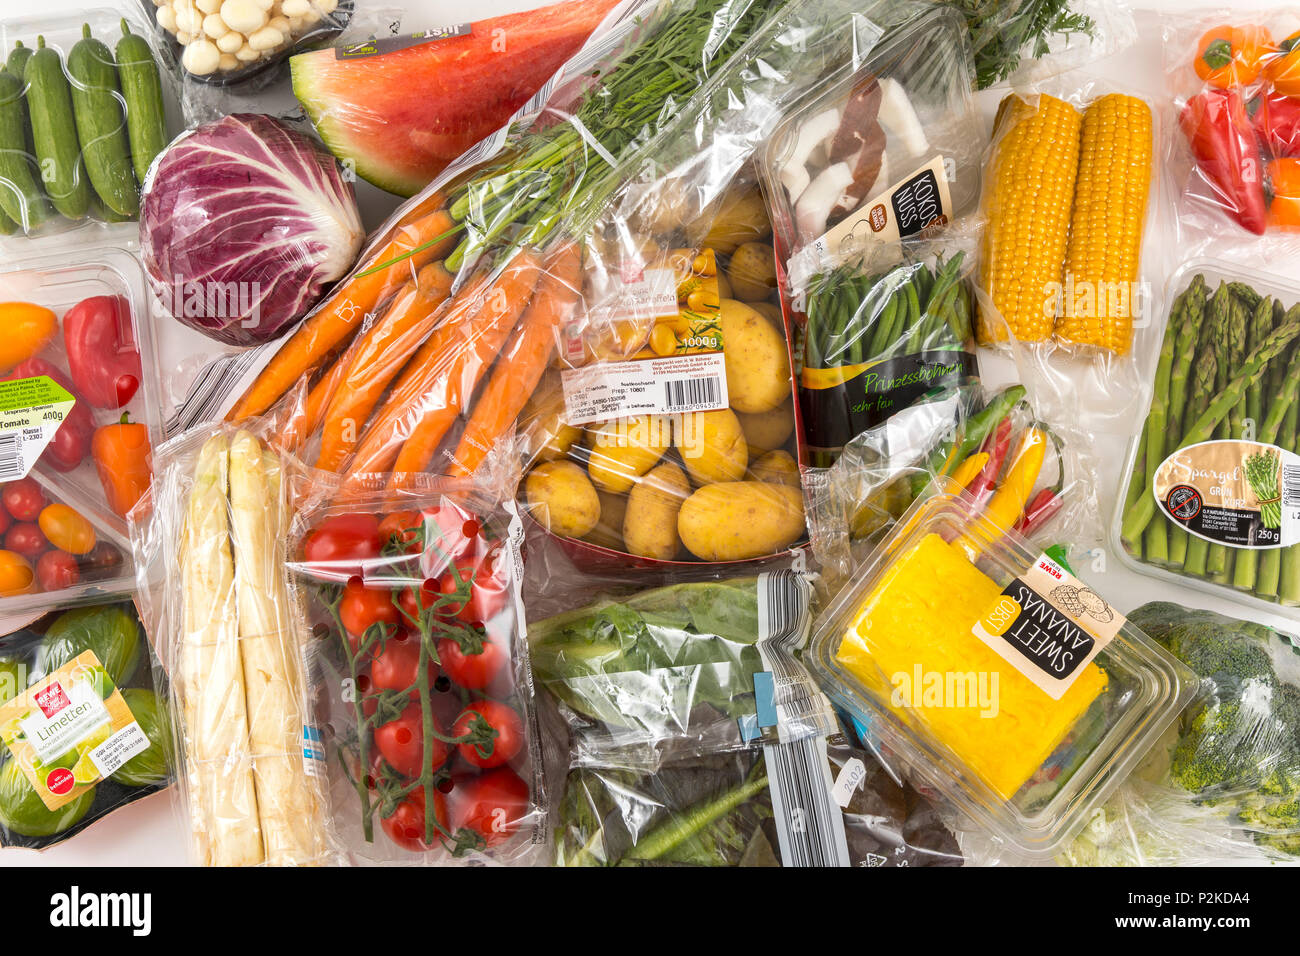 https://c8.alamy.com/comp/P2KDA4/fresh-food-vegetables-fruit-each-individually-packaged-in-plastic-wrap-all-food-is-available-in-the-same-supermarket-even-without-plastic-packagin-P2KDA4.jpg